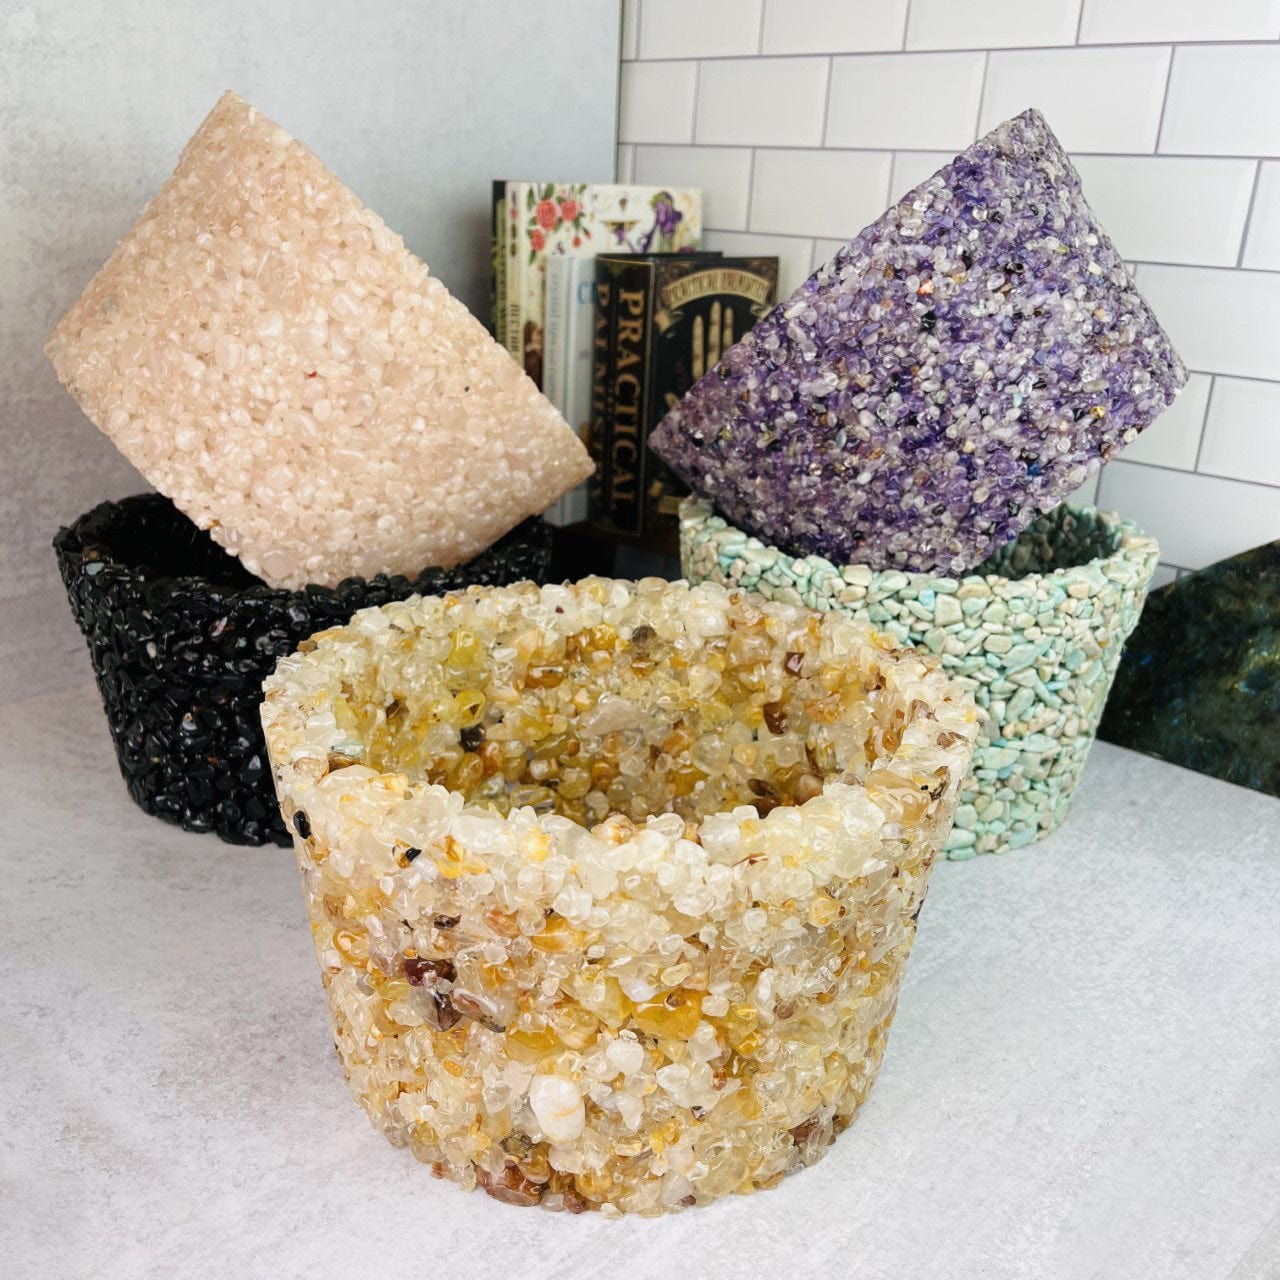 all the Tumbled Stone Pots available - Rose quartz, tourmaline, amethyst, amazonite, and golden healer